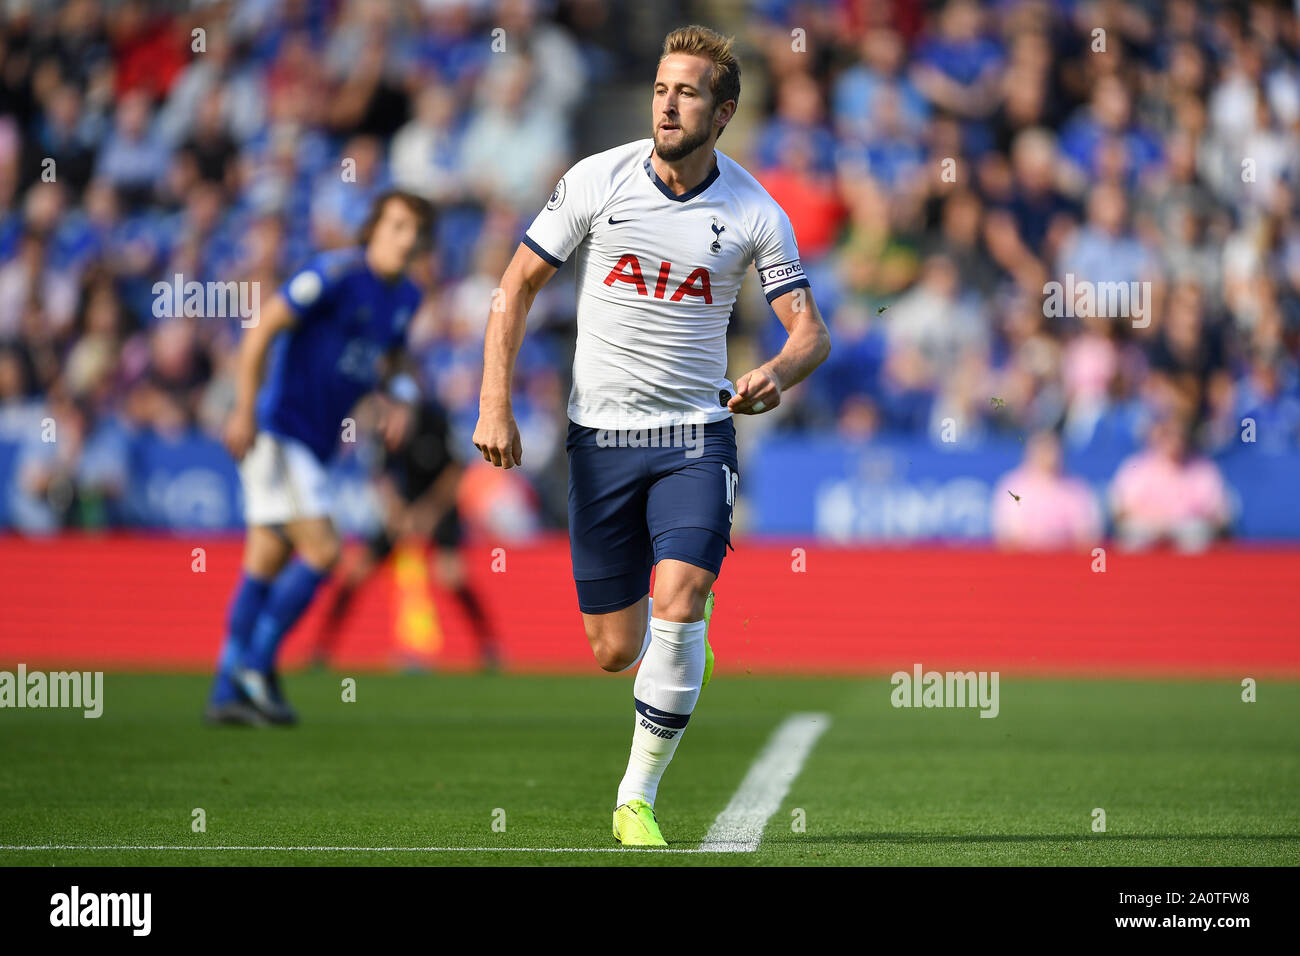 21st September 2019, King Power Stadium, Leicester, England ; Premier League Football, Leicester City vs Tottenham Hotspur : Harry Kane (10) of Tottenham Hotspur   Credit: Jon Hobley/News Images  English Football League images are subject to DataCo Licence Stock Photo